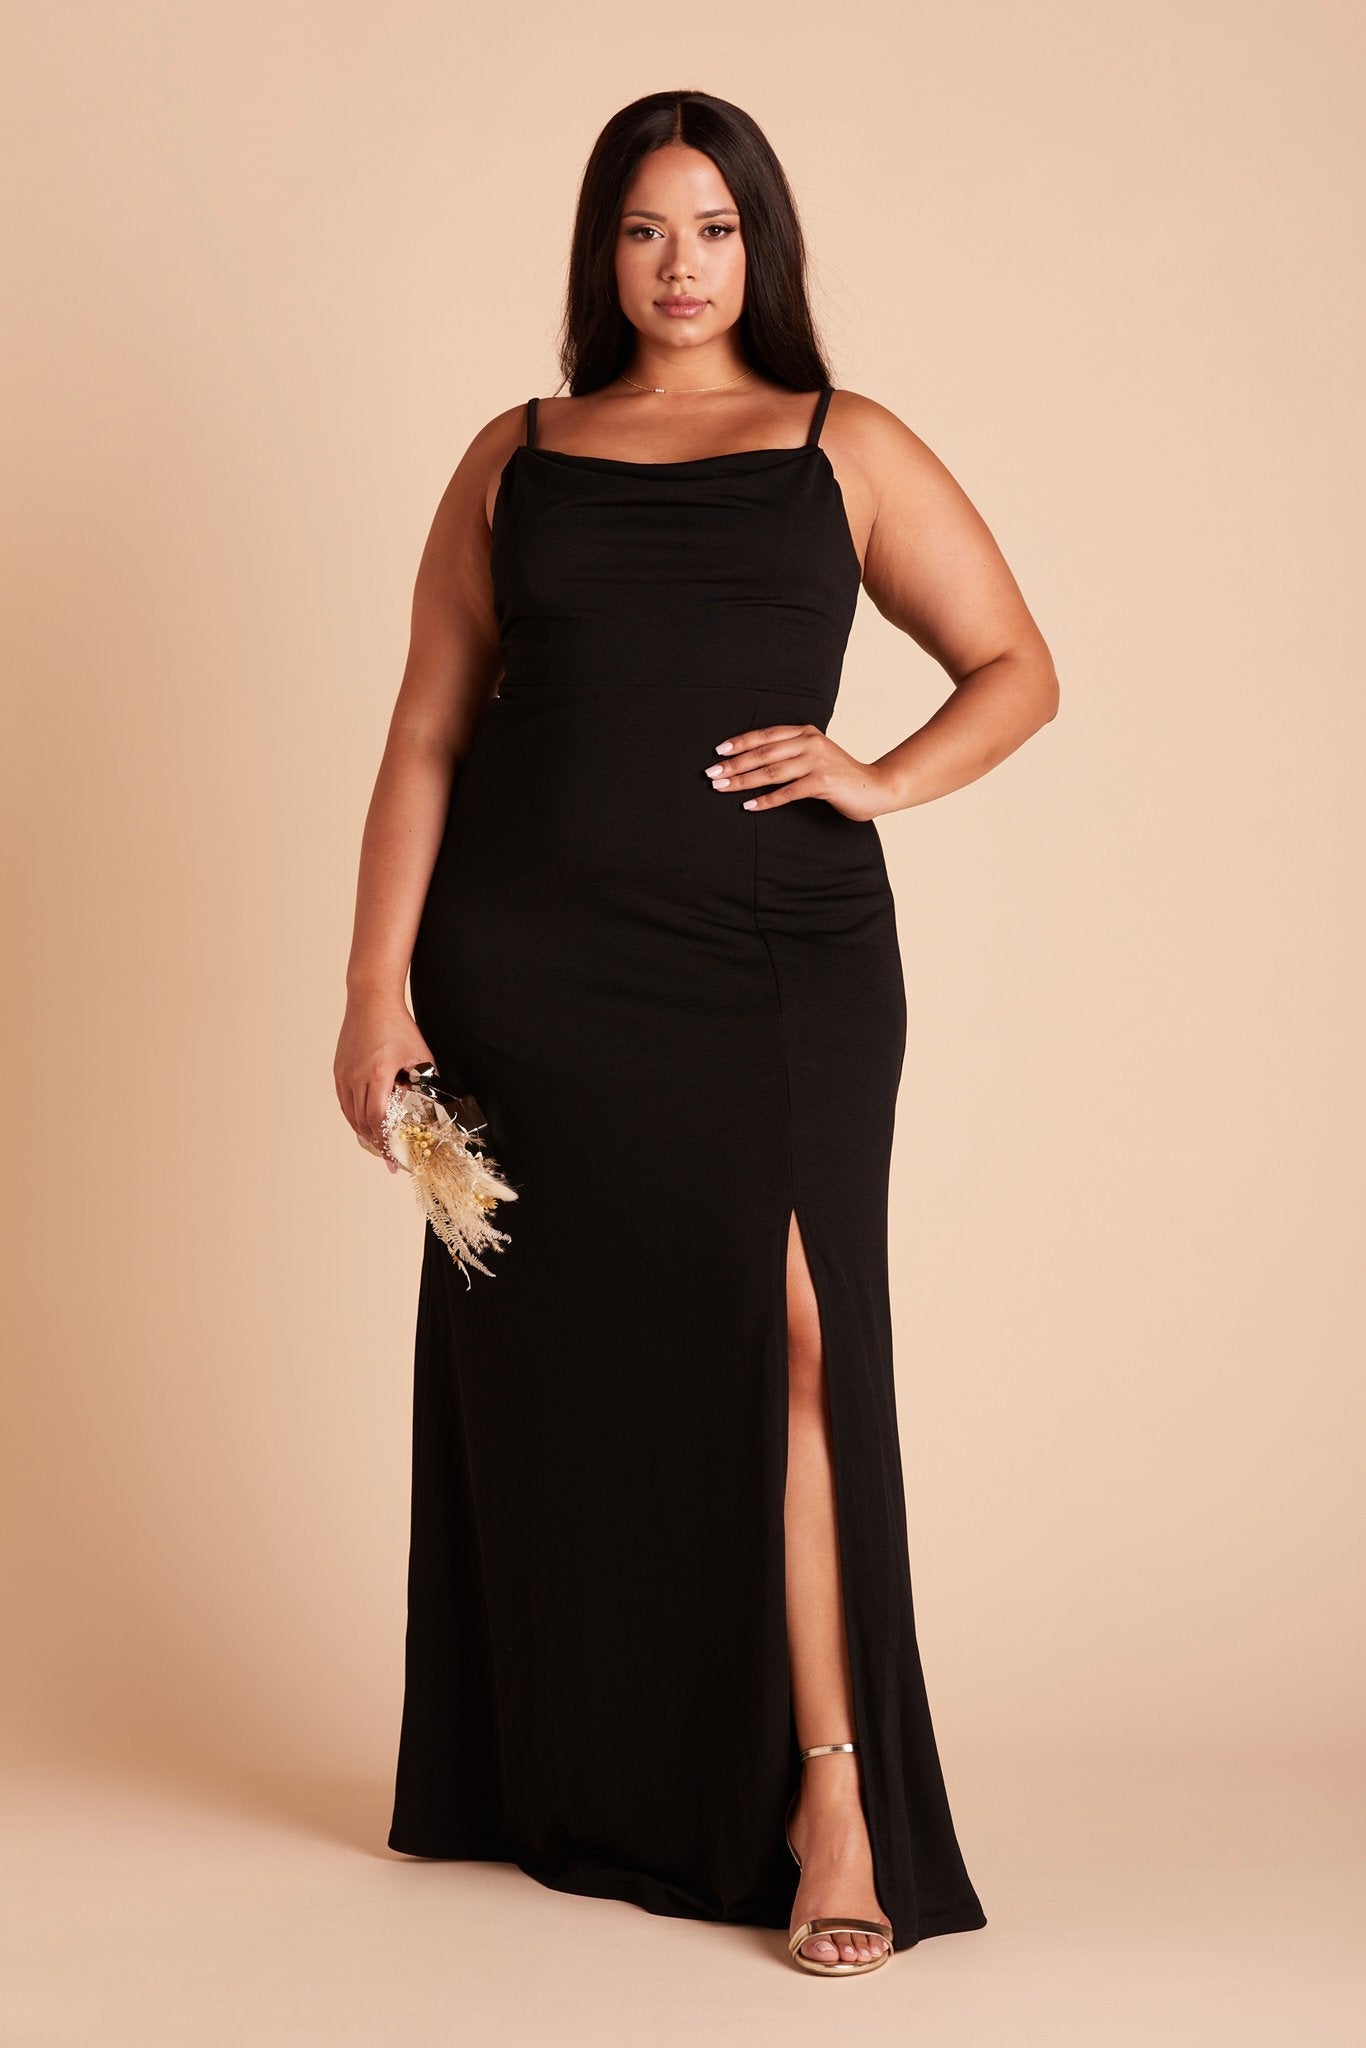 Front view of the floor-length Ash Bridesmaid Dress Curve in black crepe by Birdy Grey with a slightly draped cowl neck front. The flowing skirt features a slit over the front left leg.